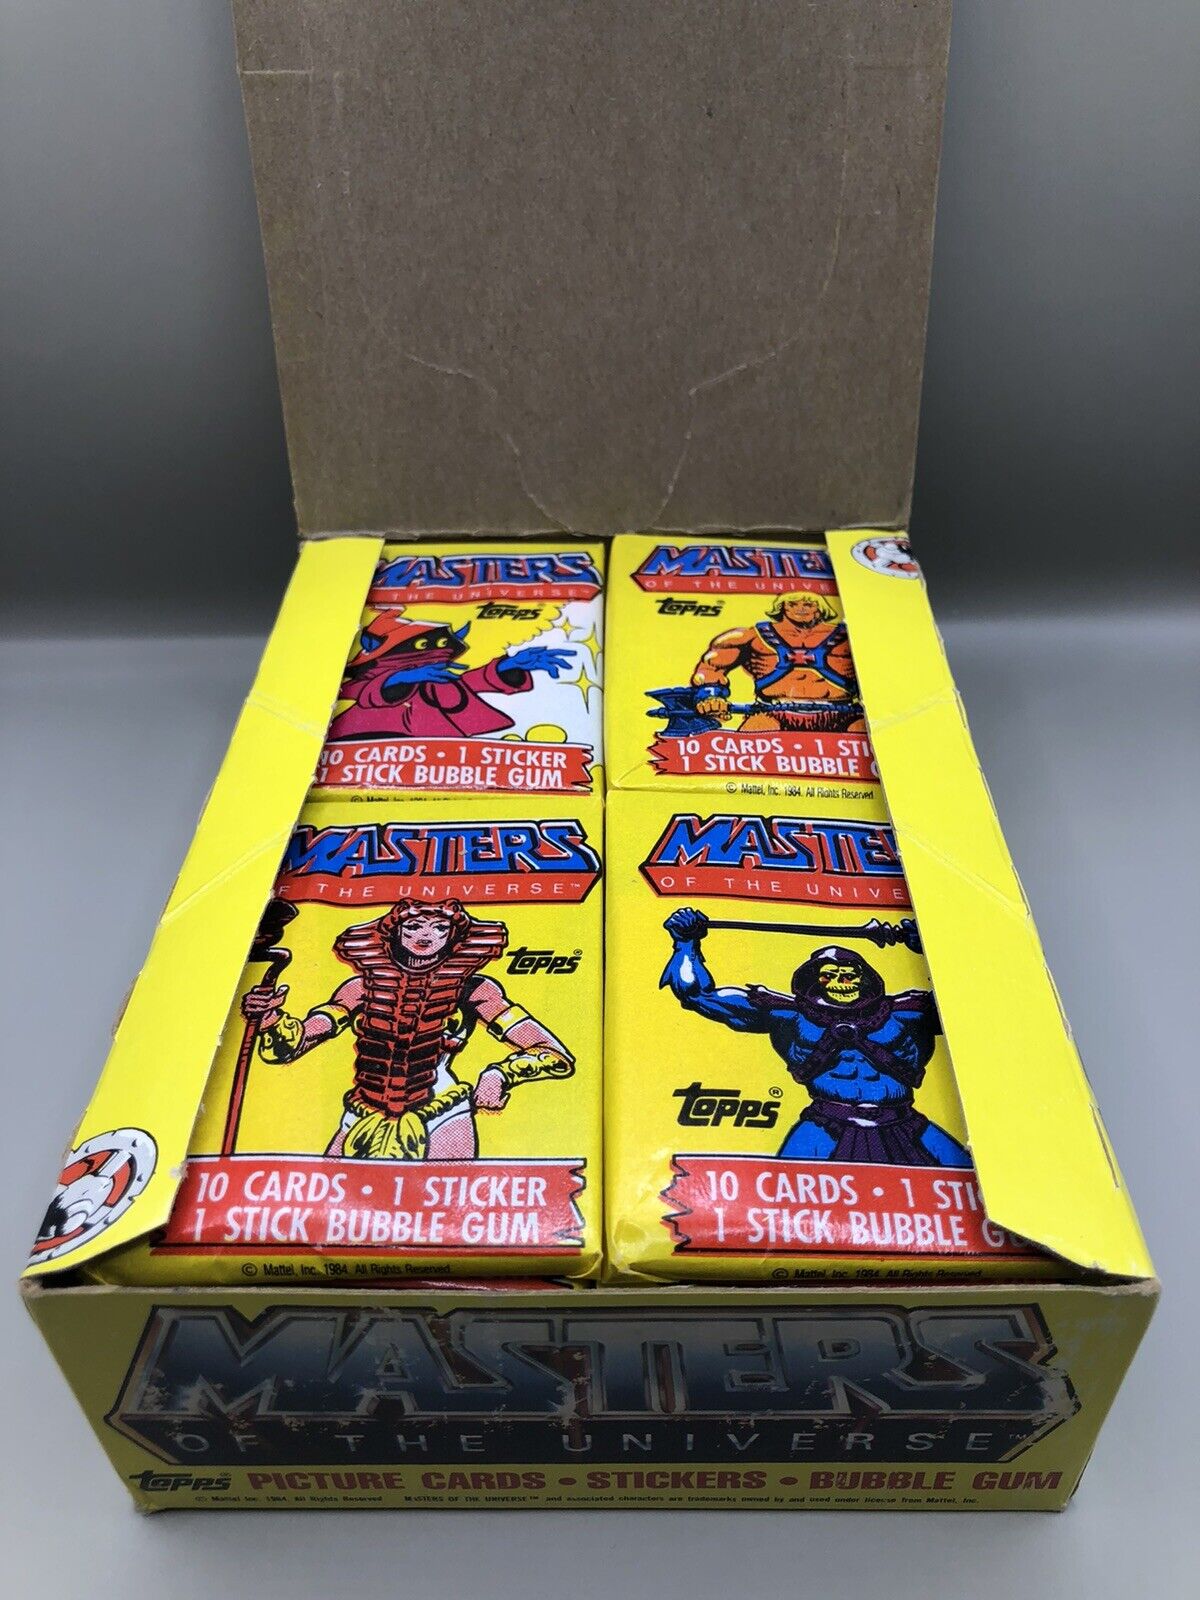 1984 He-Man “Masters Of The Universe” Original Topps (1) Wax Pack. Vintage Rare